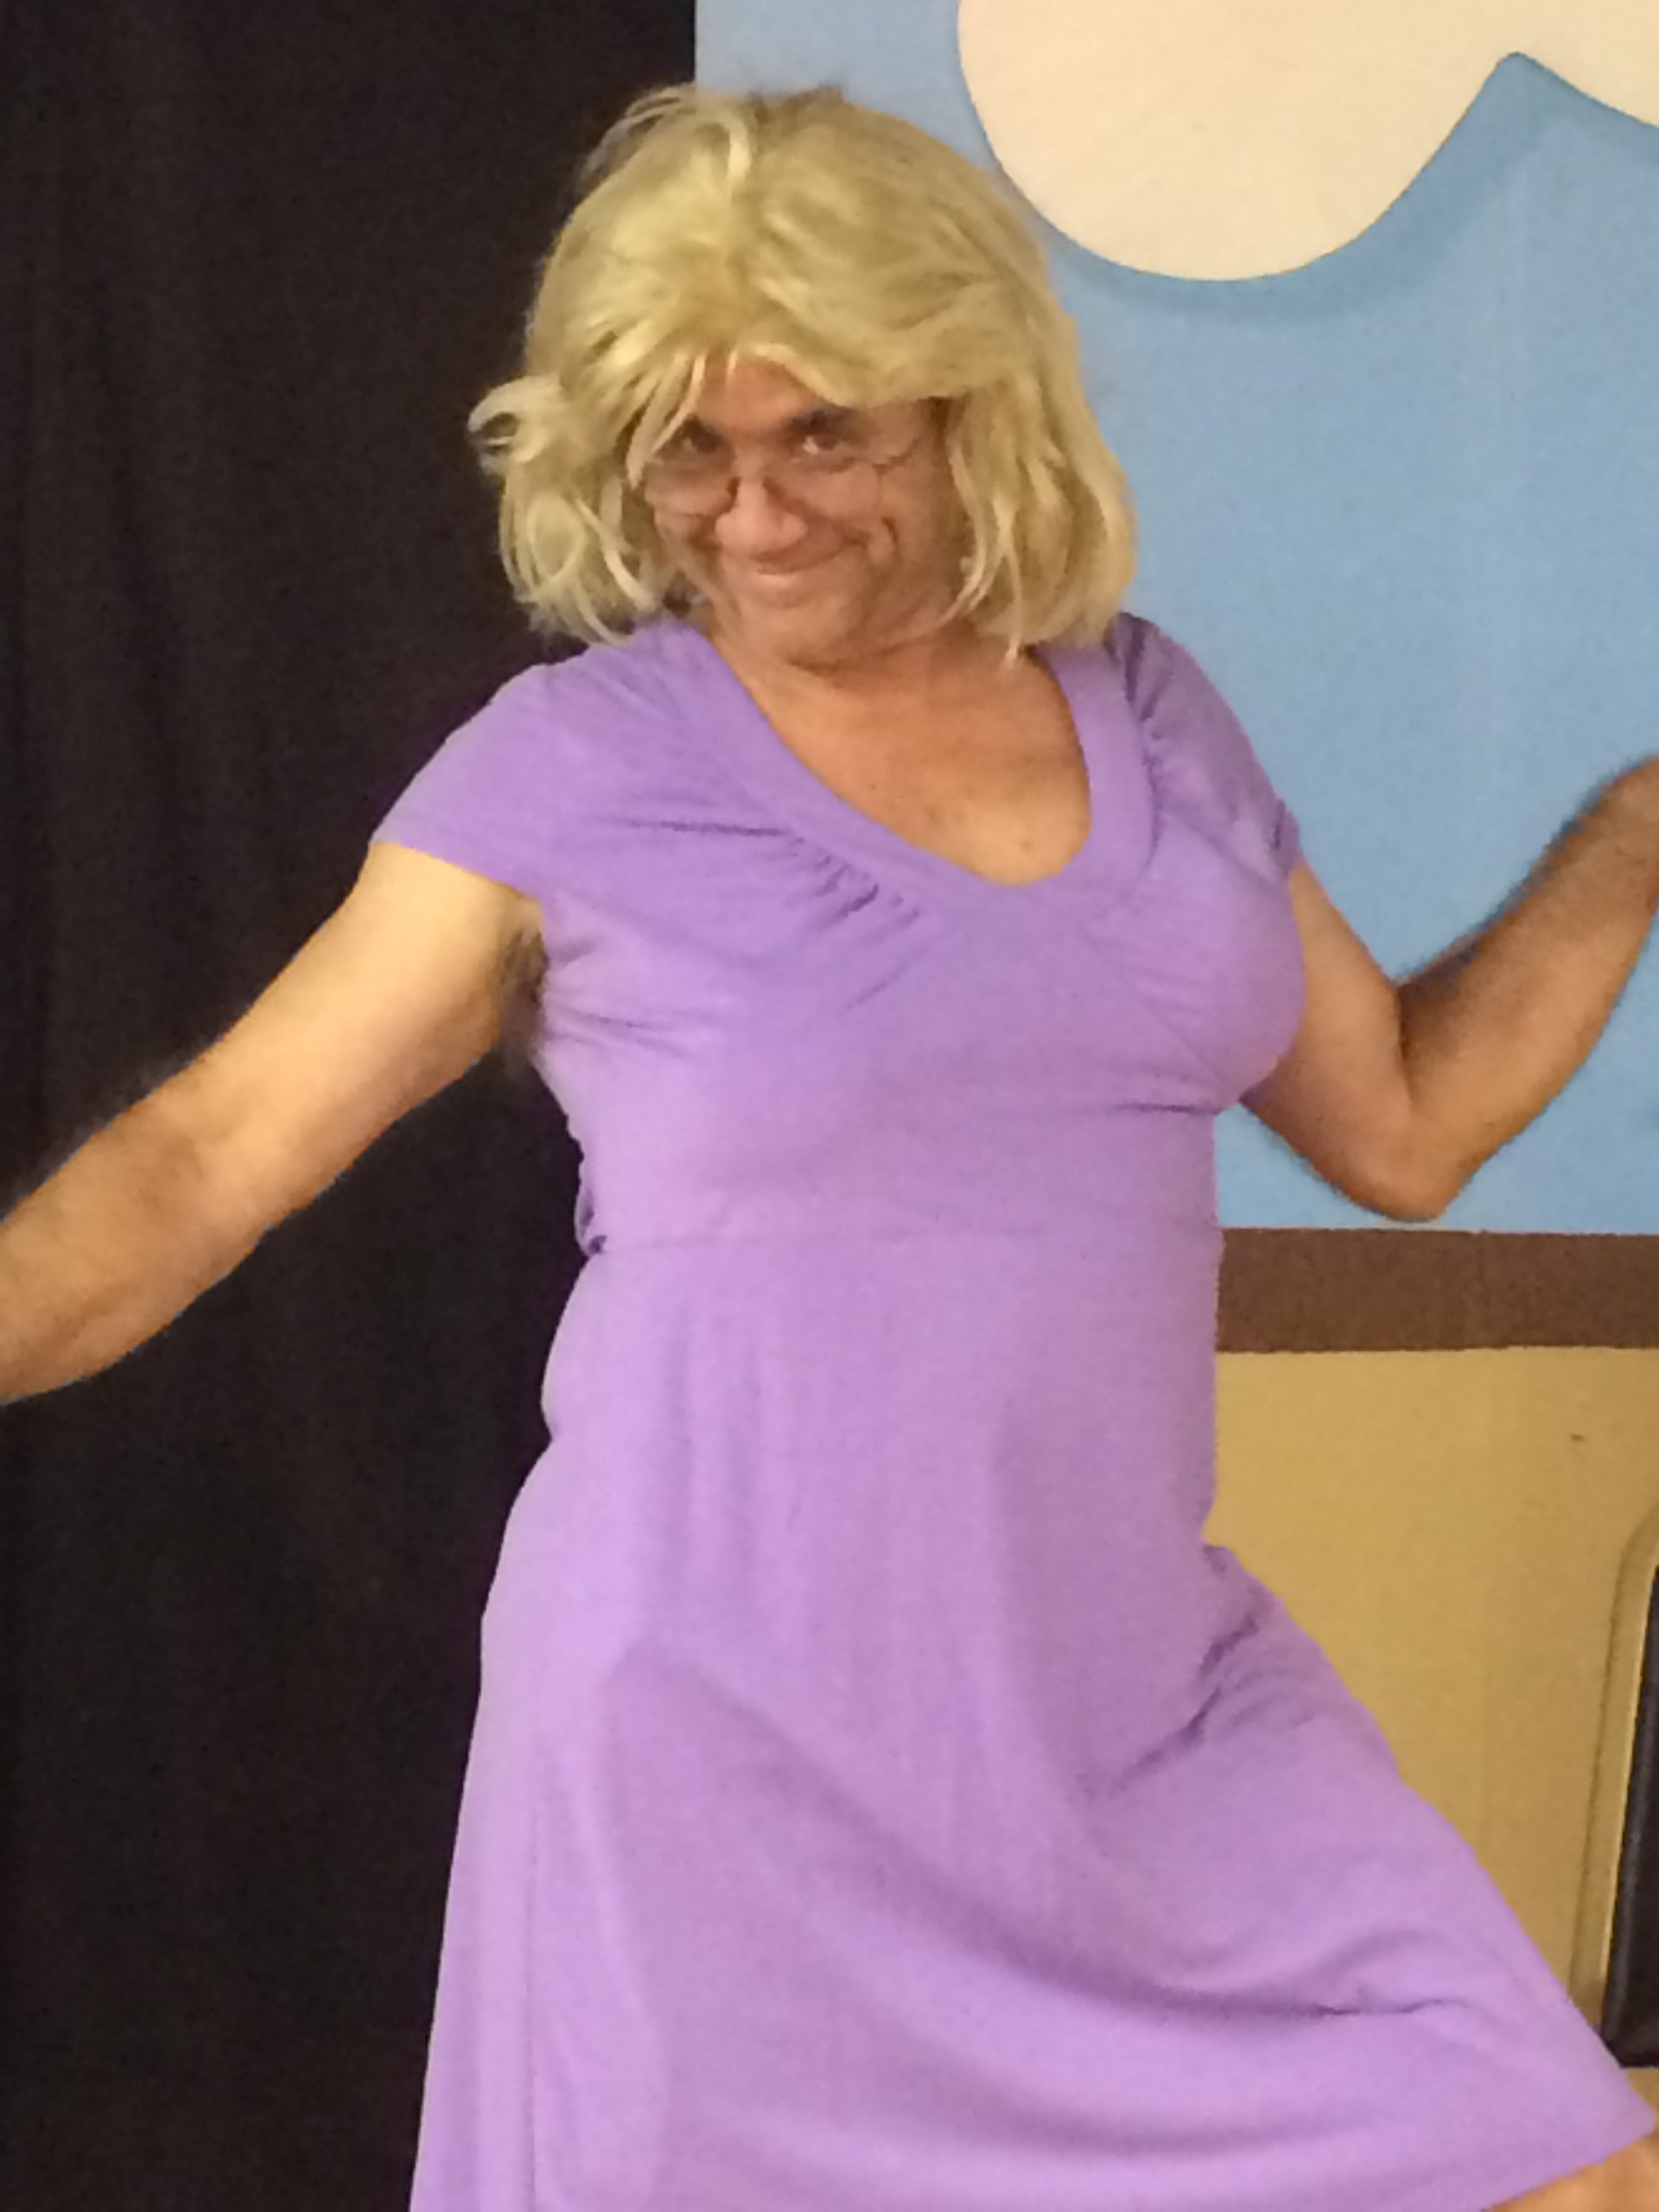 A male actor dressed as a woman in a purple dress and blonde wig